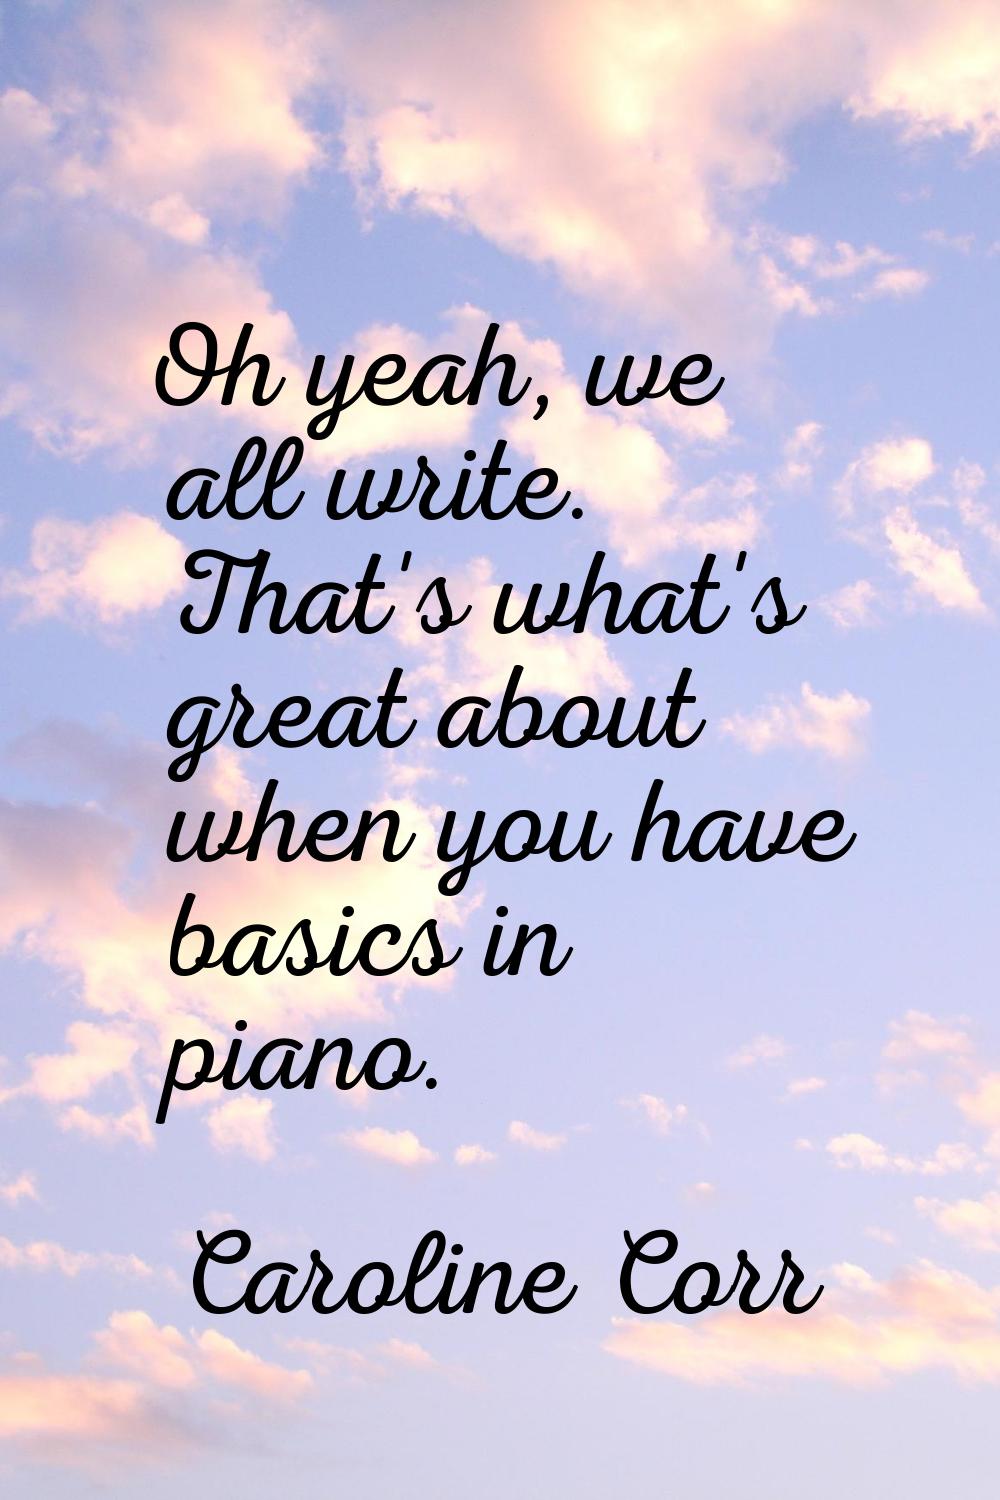 Oh yeah, we all write. That's what's great about when you have basics in piano.